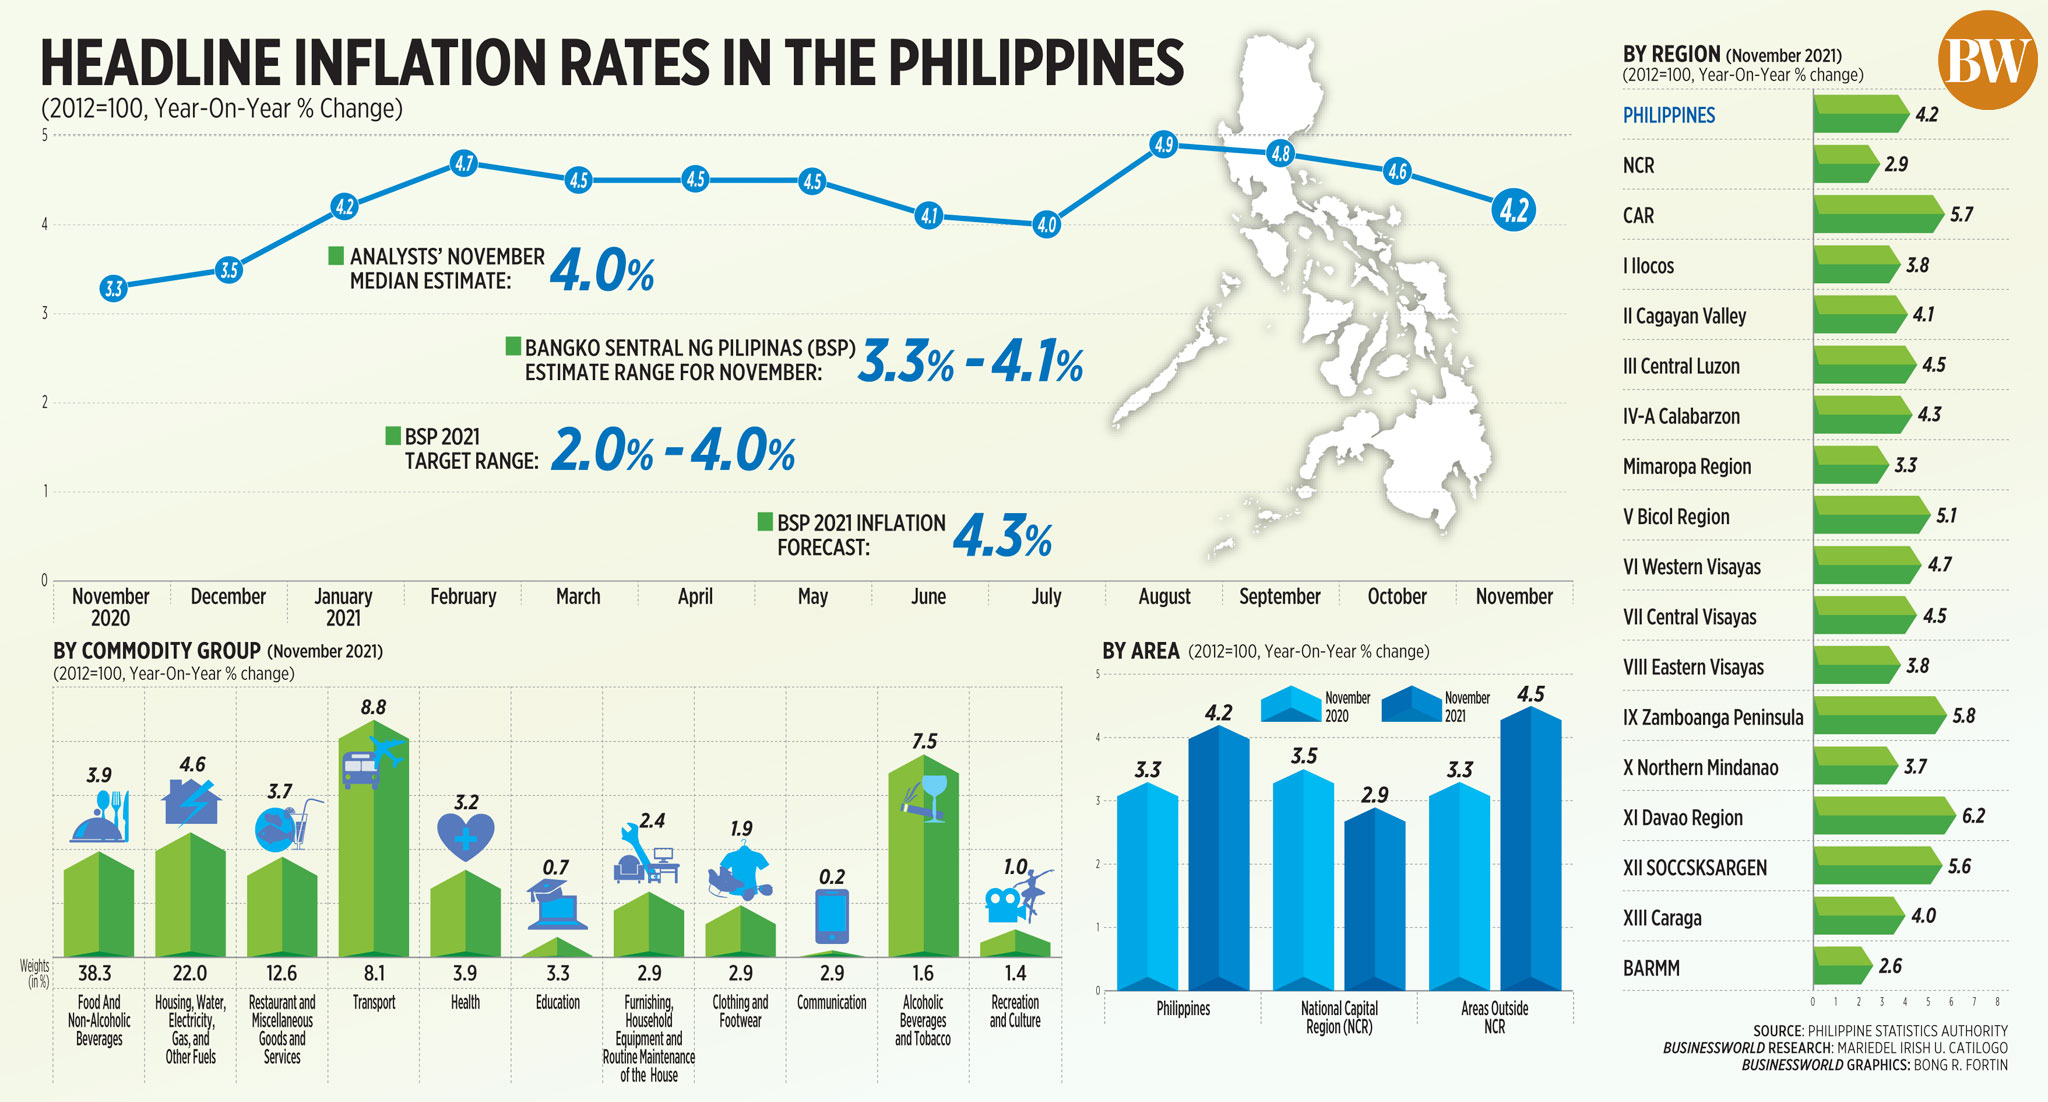 Headline inflation rates in the Philippines (Nov. 2021)